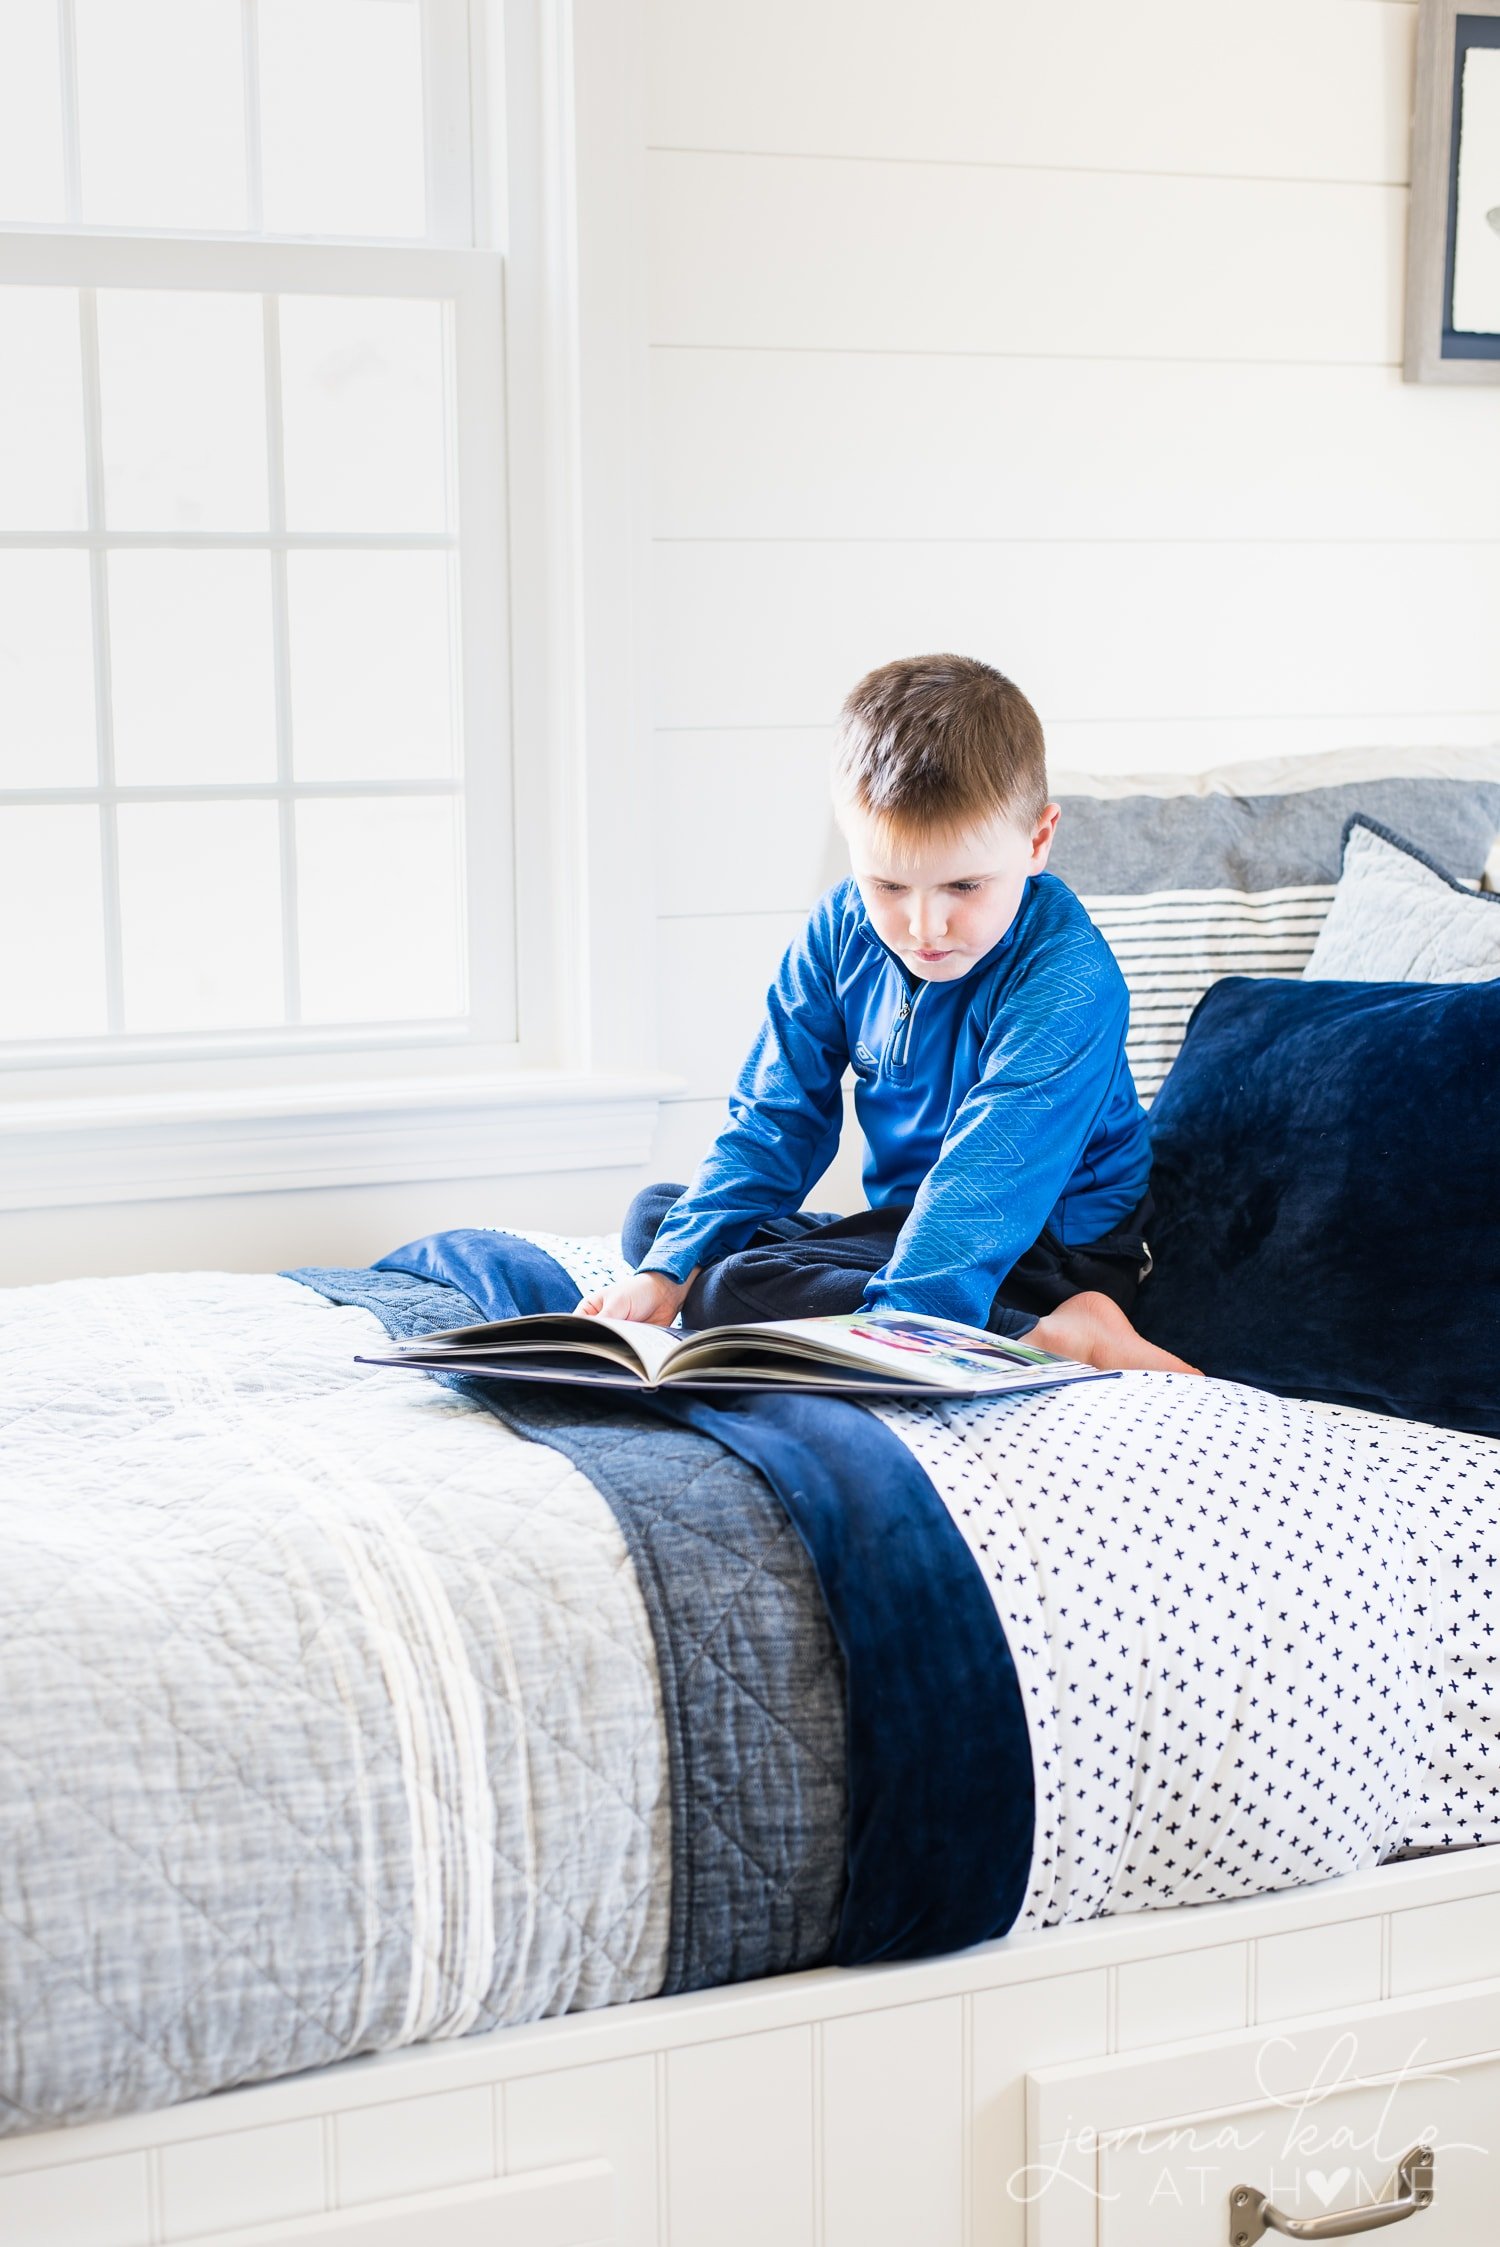 Young boy reading on the bed with layered bedding - small print bedsheets, solid navy duvet cover and gray quilt.